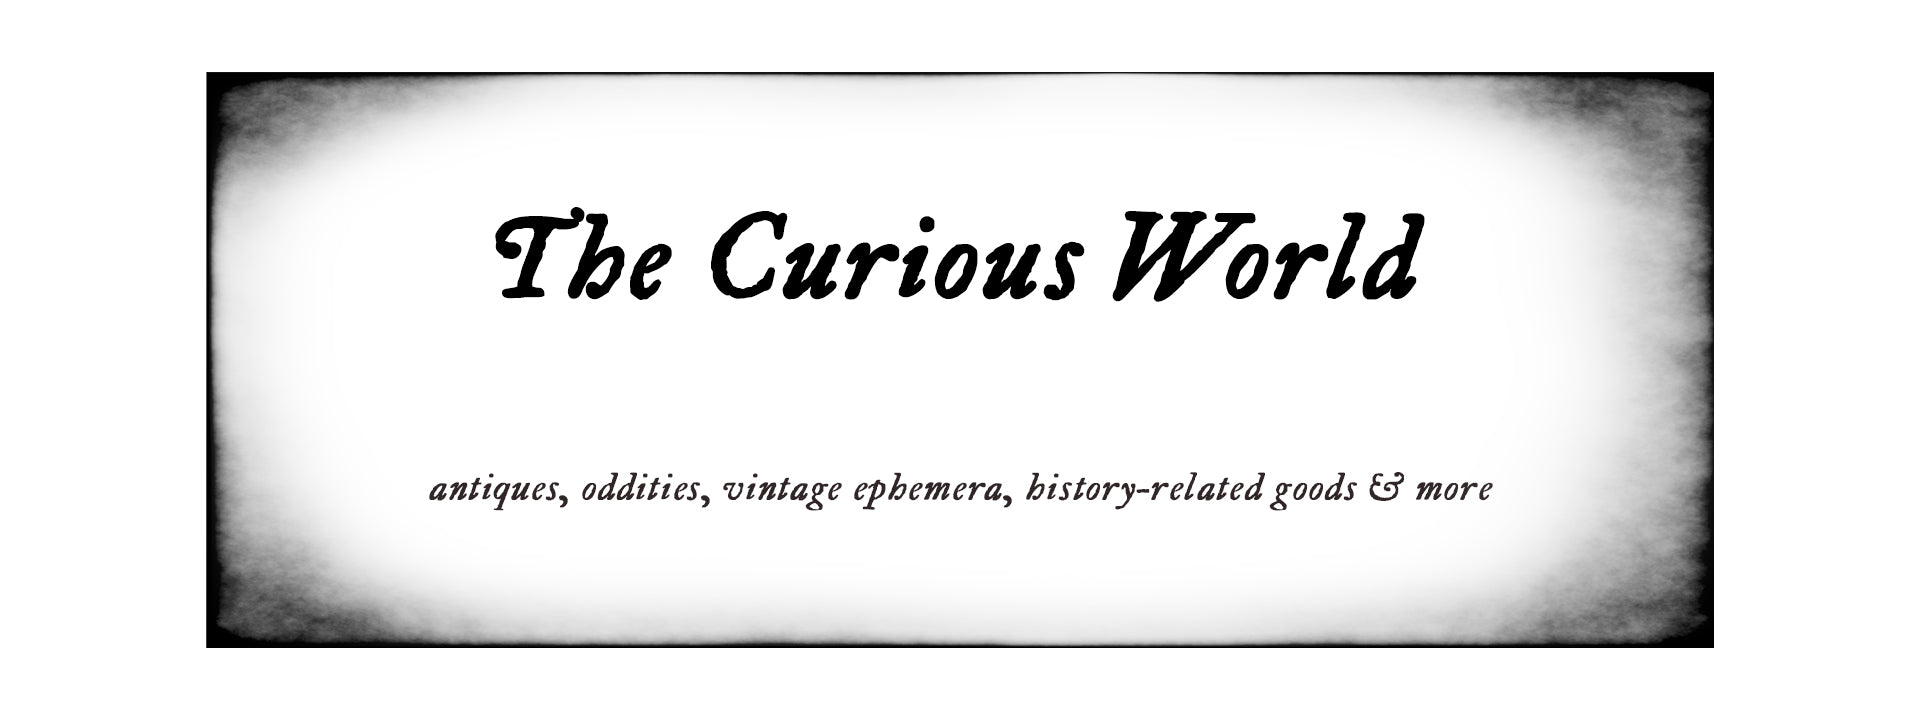 The Curious World shop for history, antiques, oddities, vintage ephemera and more